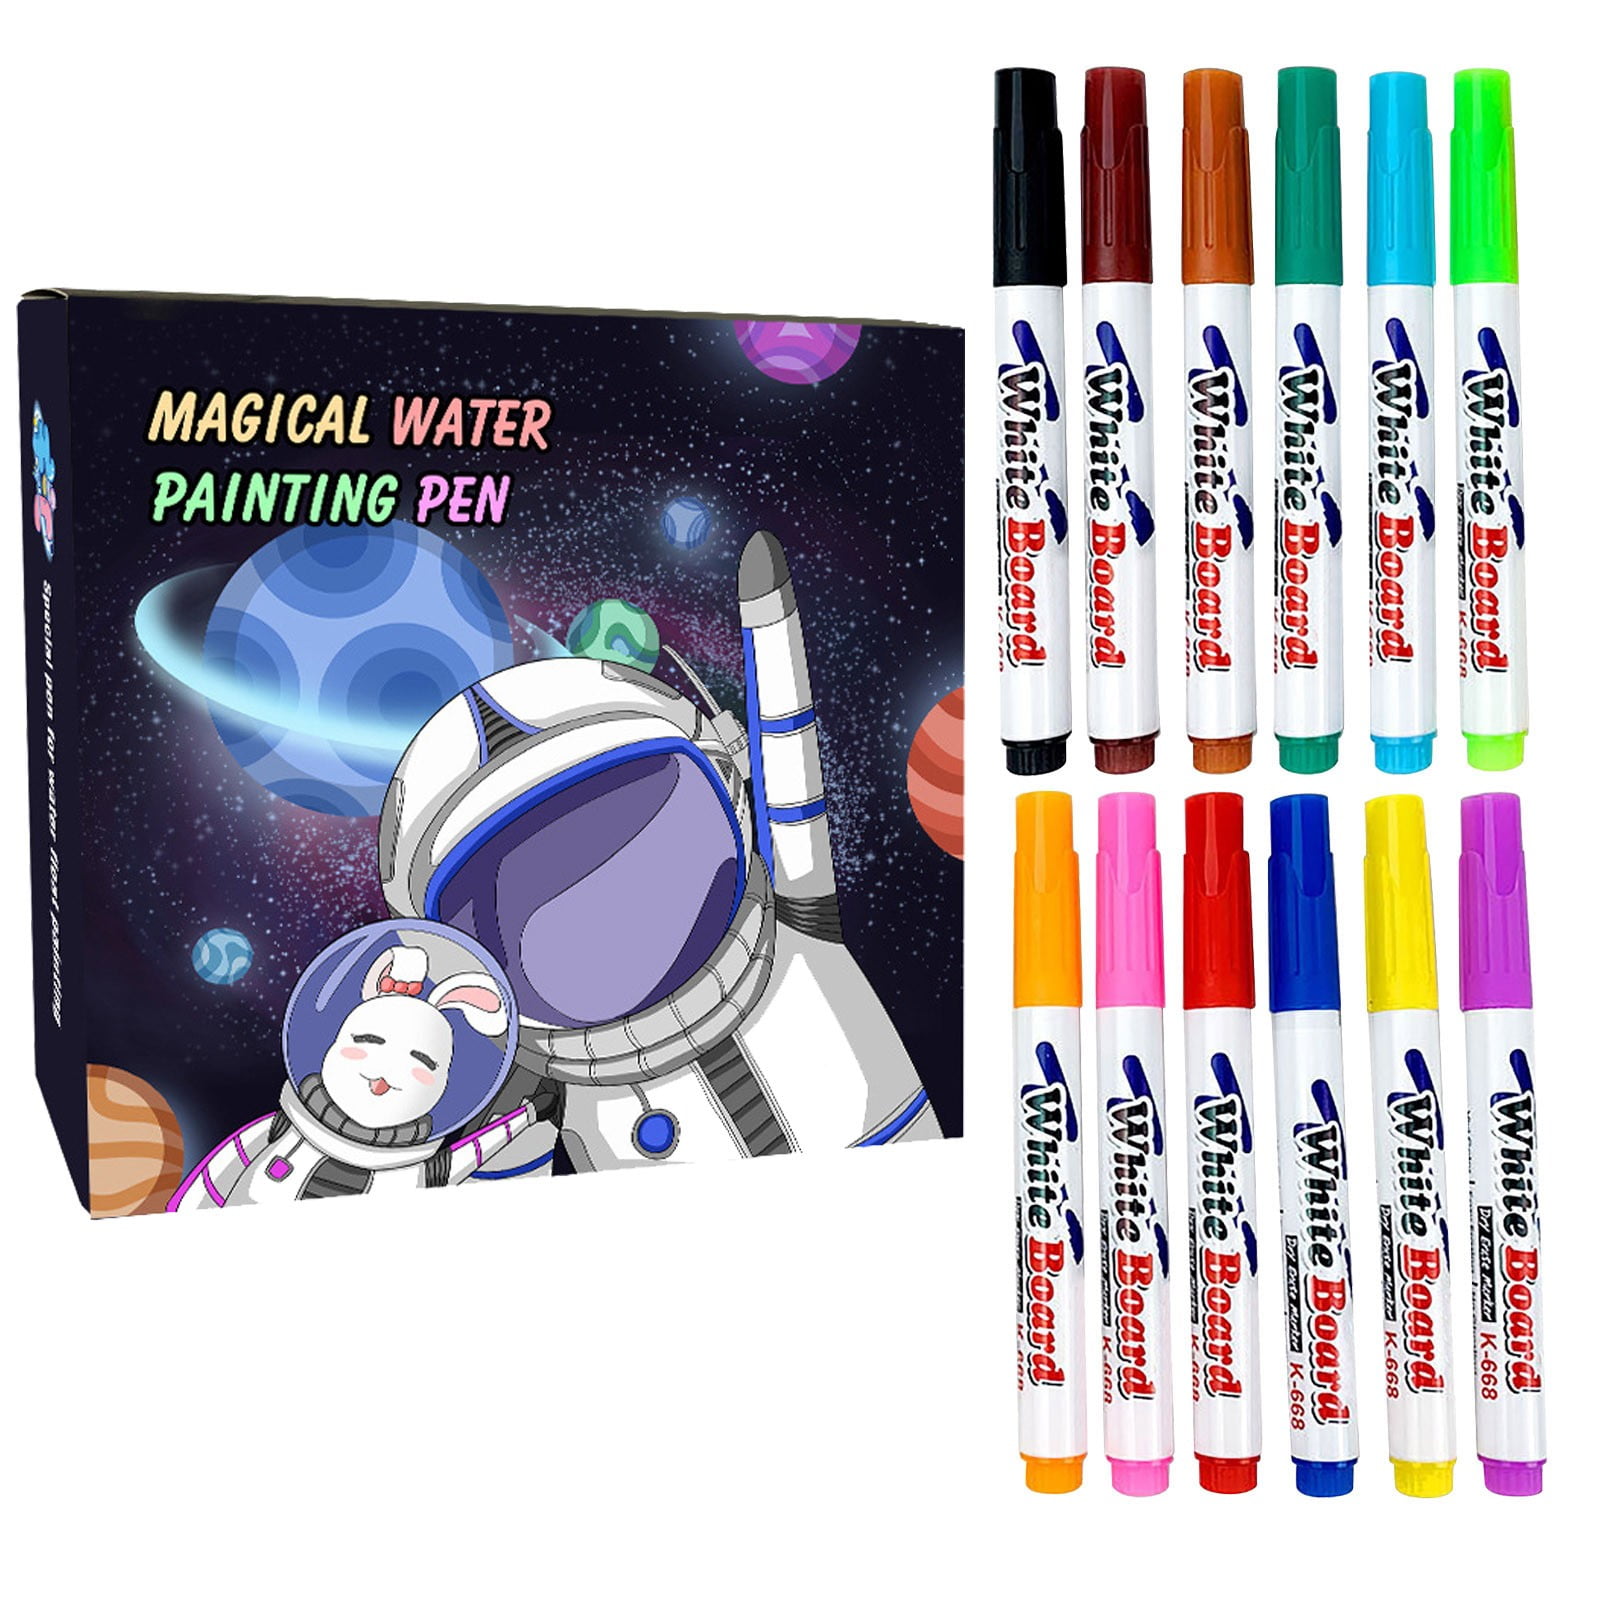 SDJMa Magic Drawing Pen, Magical Water Painting Pens for Kids, Floating Ink  Drawings Pen, Erasable Water-based Whiteboard Marker Gifts for Boys and